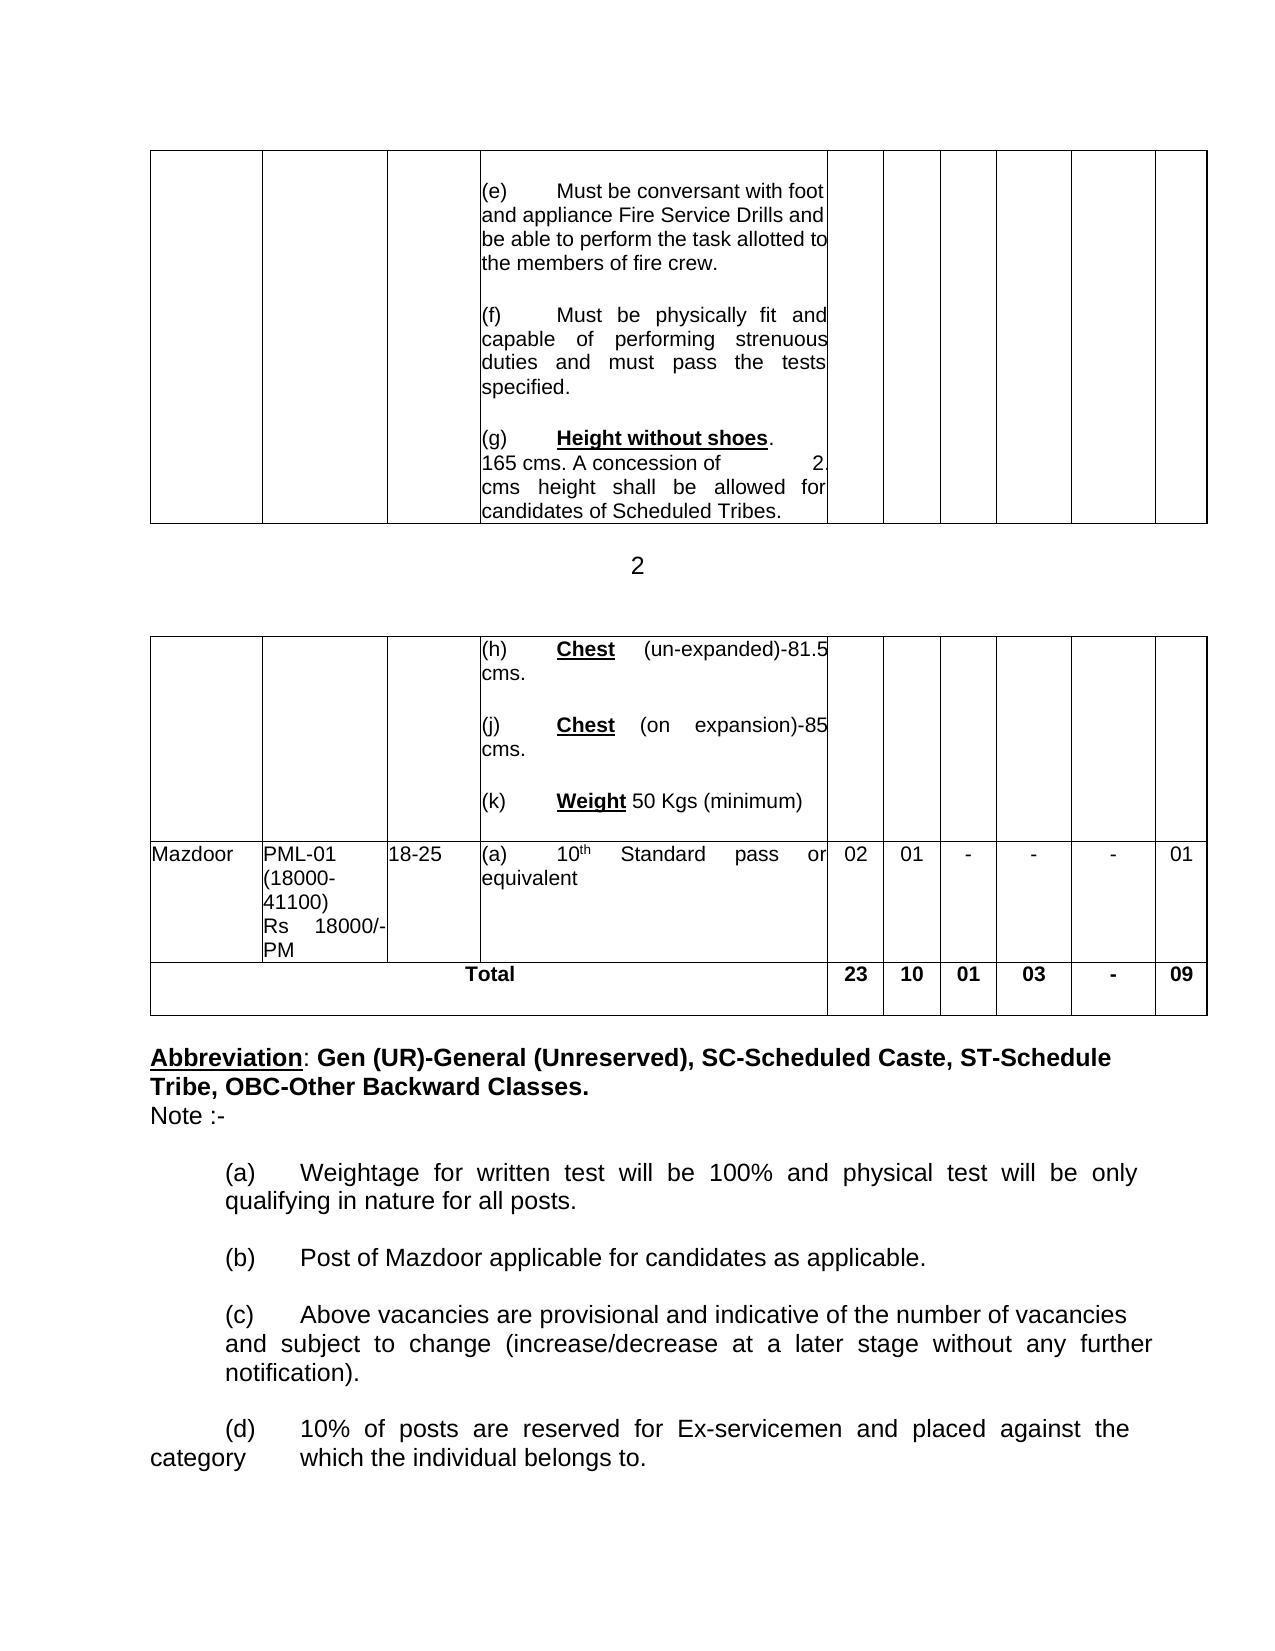 HQ Northern Command Fireman and Various Posts Recruitment 2022 - Page 3